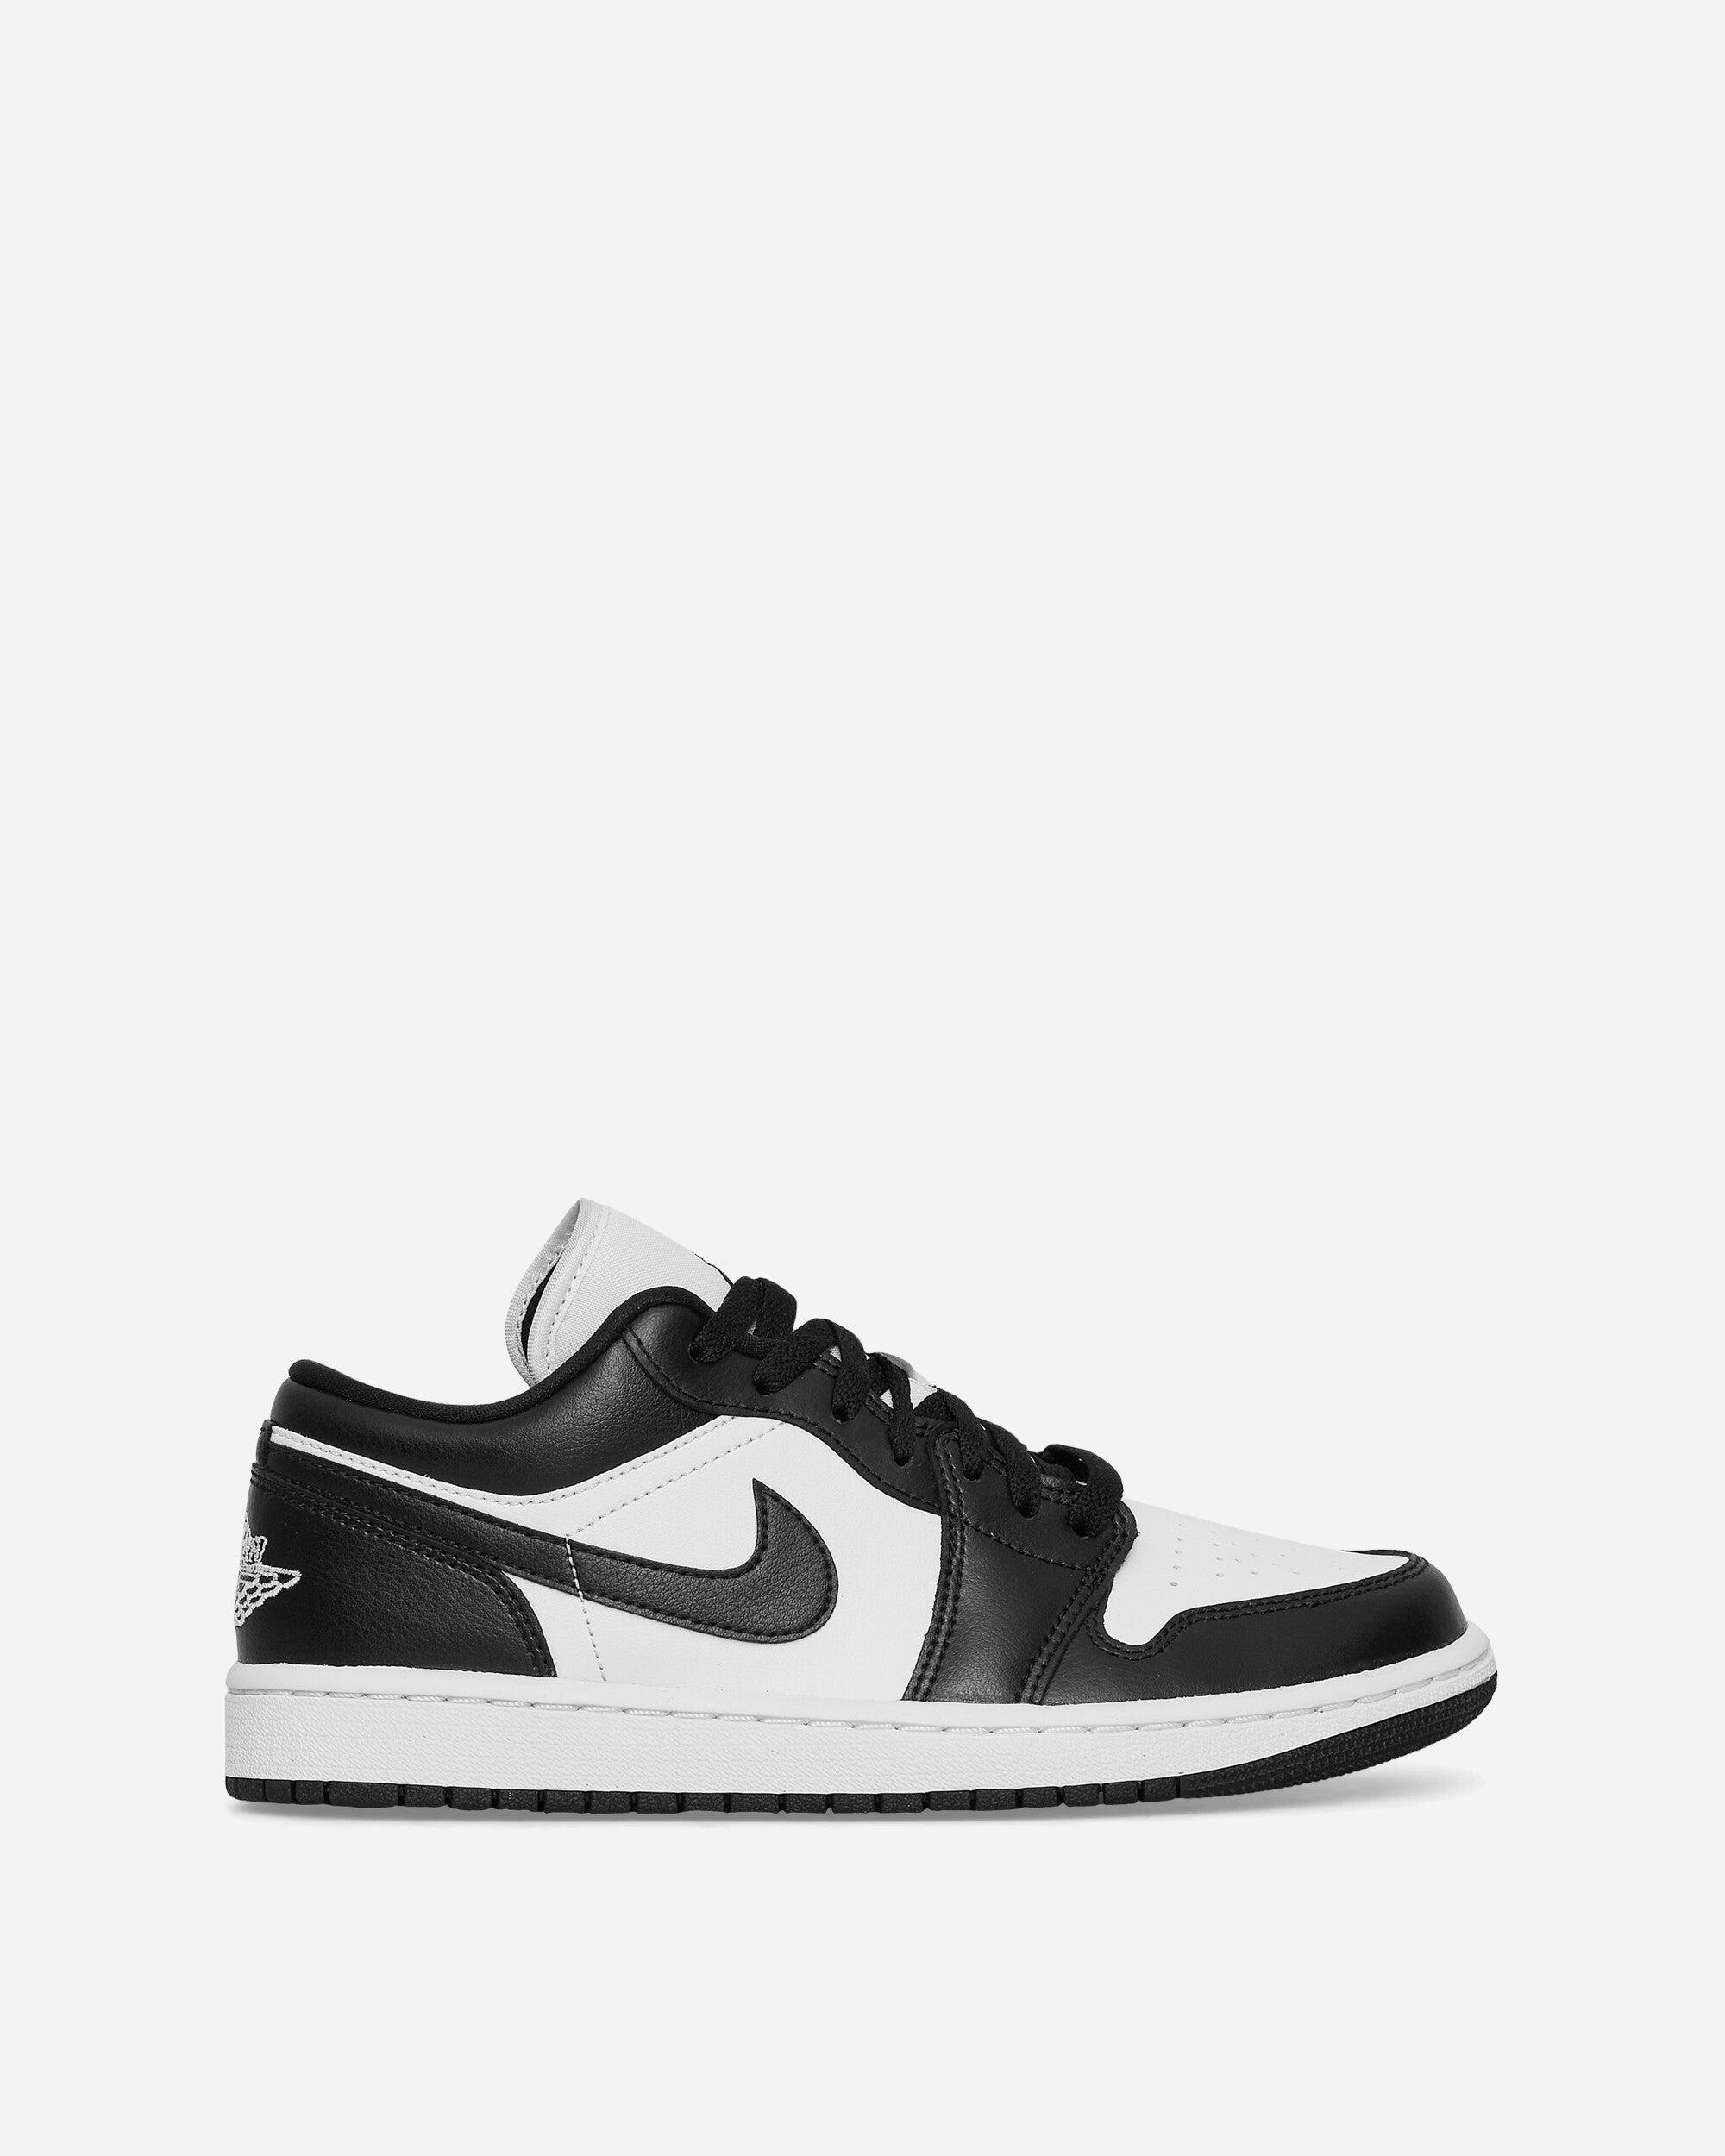 Nike Air Jordan 1 Low Chunky Sole Leather Low-top Trainers in Black | Lyst  UK